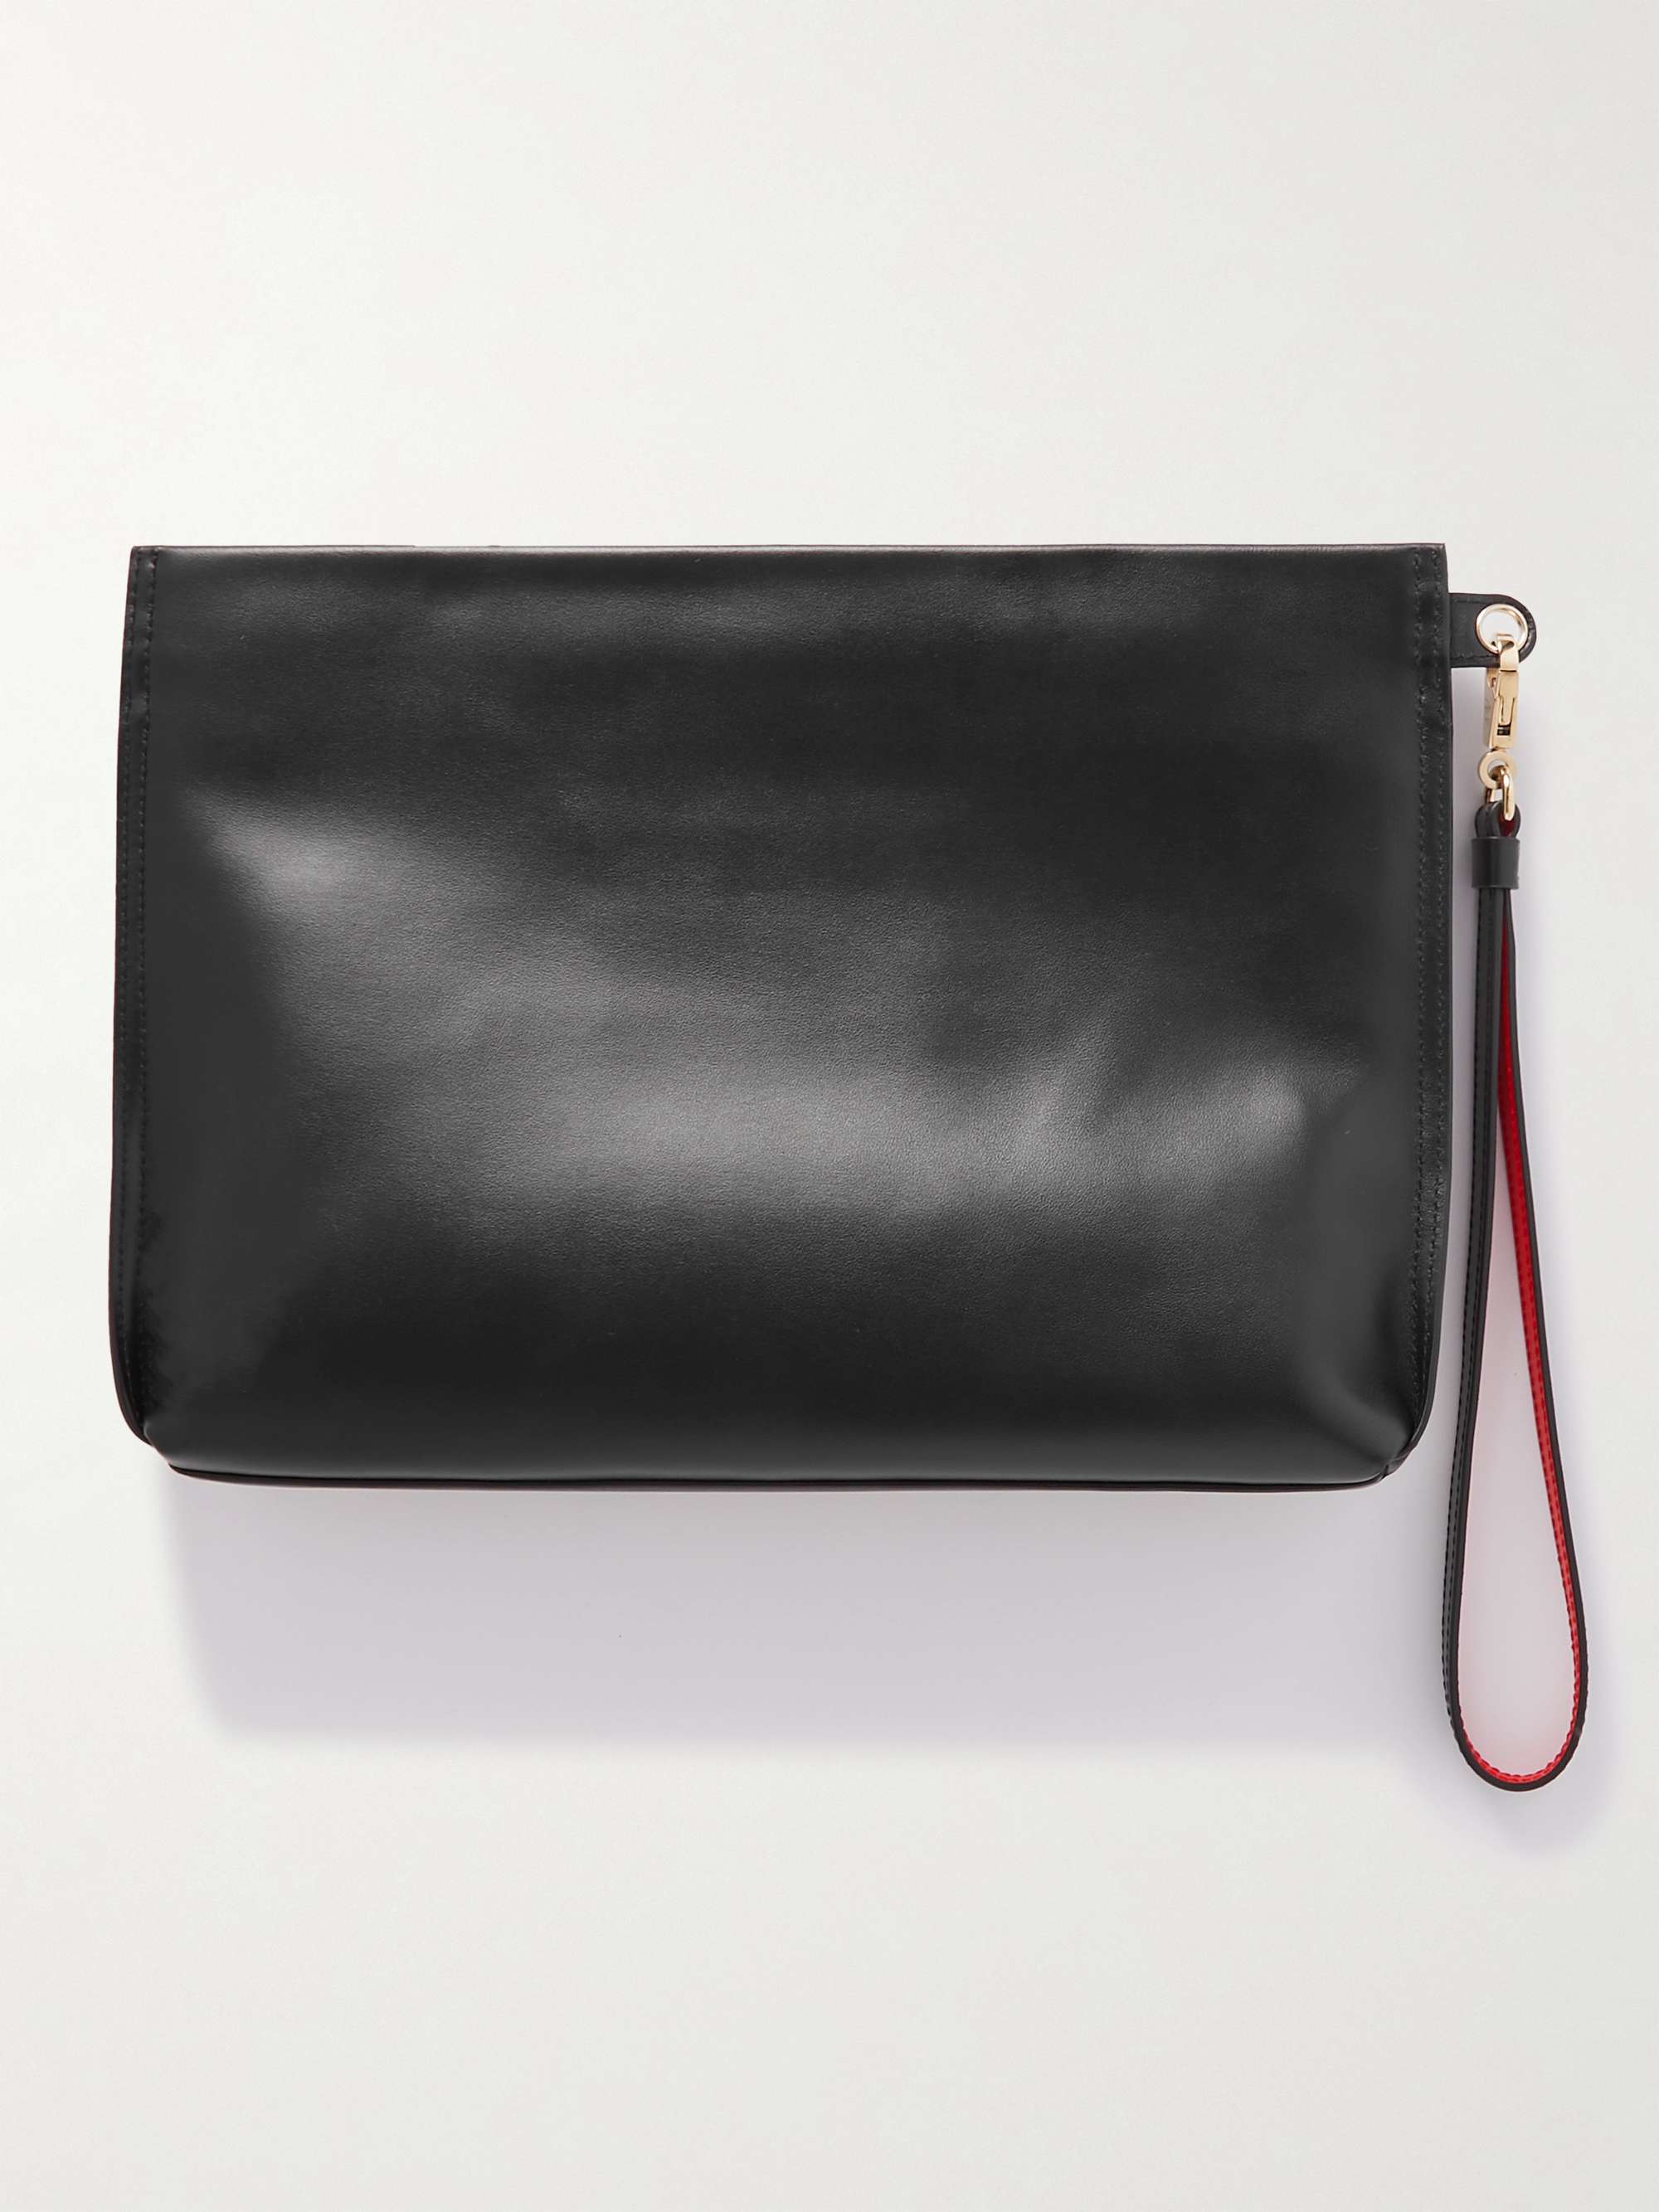 CHRISTIAN LOUBOUTIN City Studded Leather Pouch